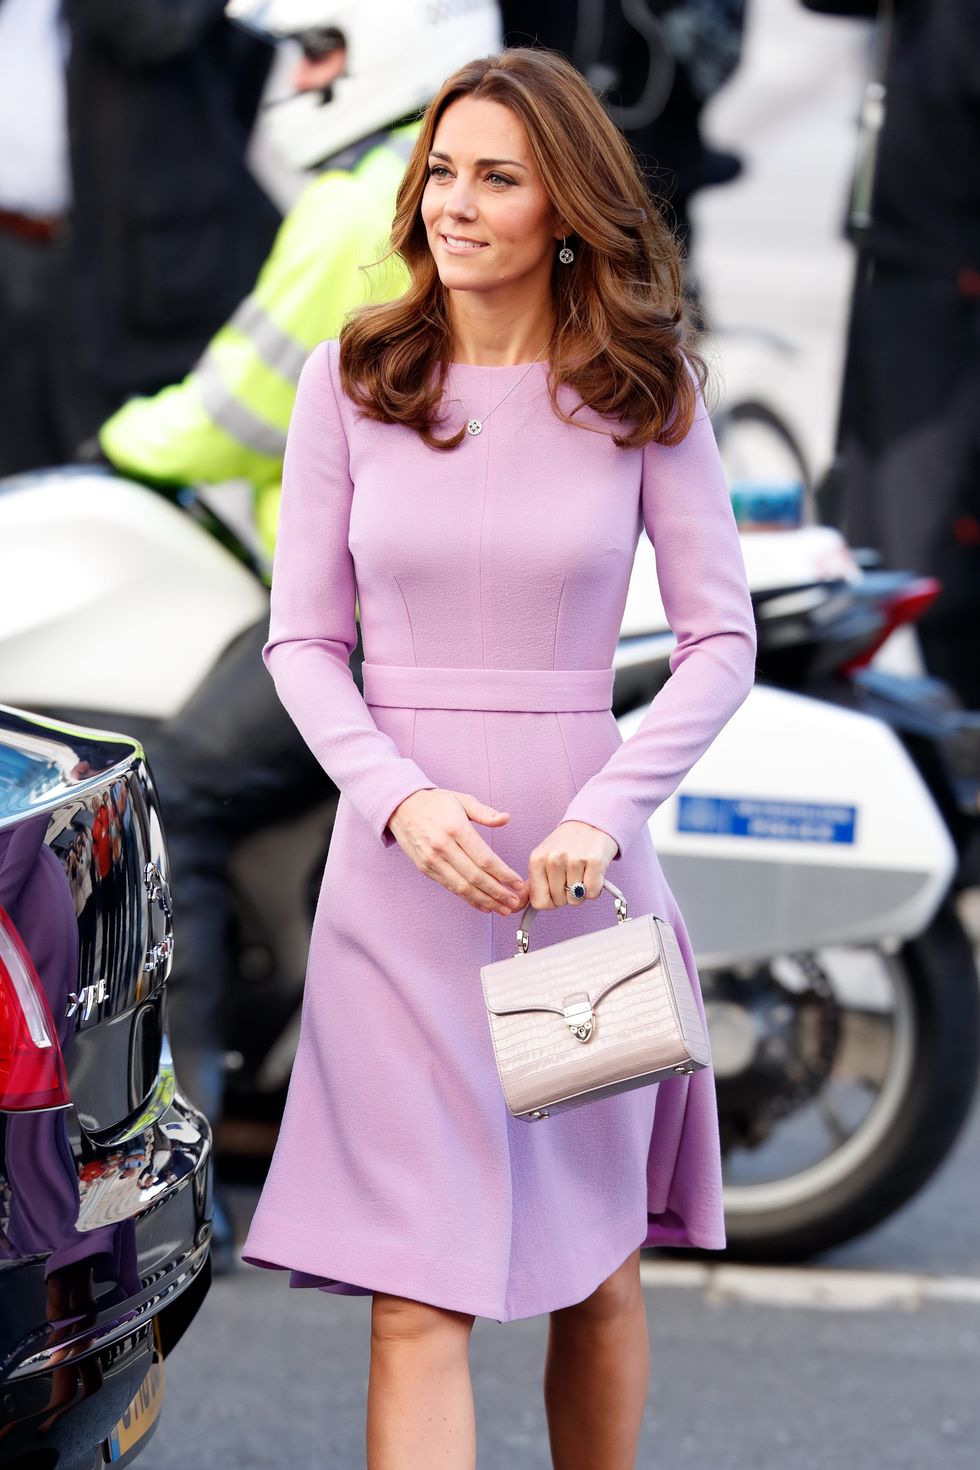 london, united kingdom october 09 embargoed for publication in uk newspapers until 24 hours after create date and time catherine, duchess of cambridge attends the global ministerial mental health summit at london county hall on october 9, 2018 in london, england photo by max mumbyindigogetty images